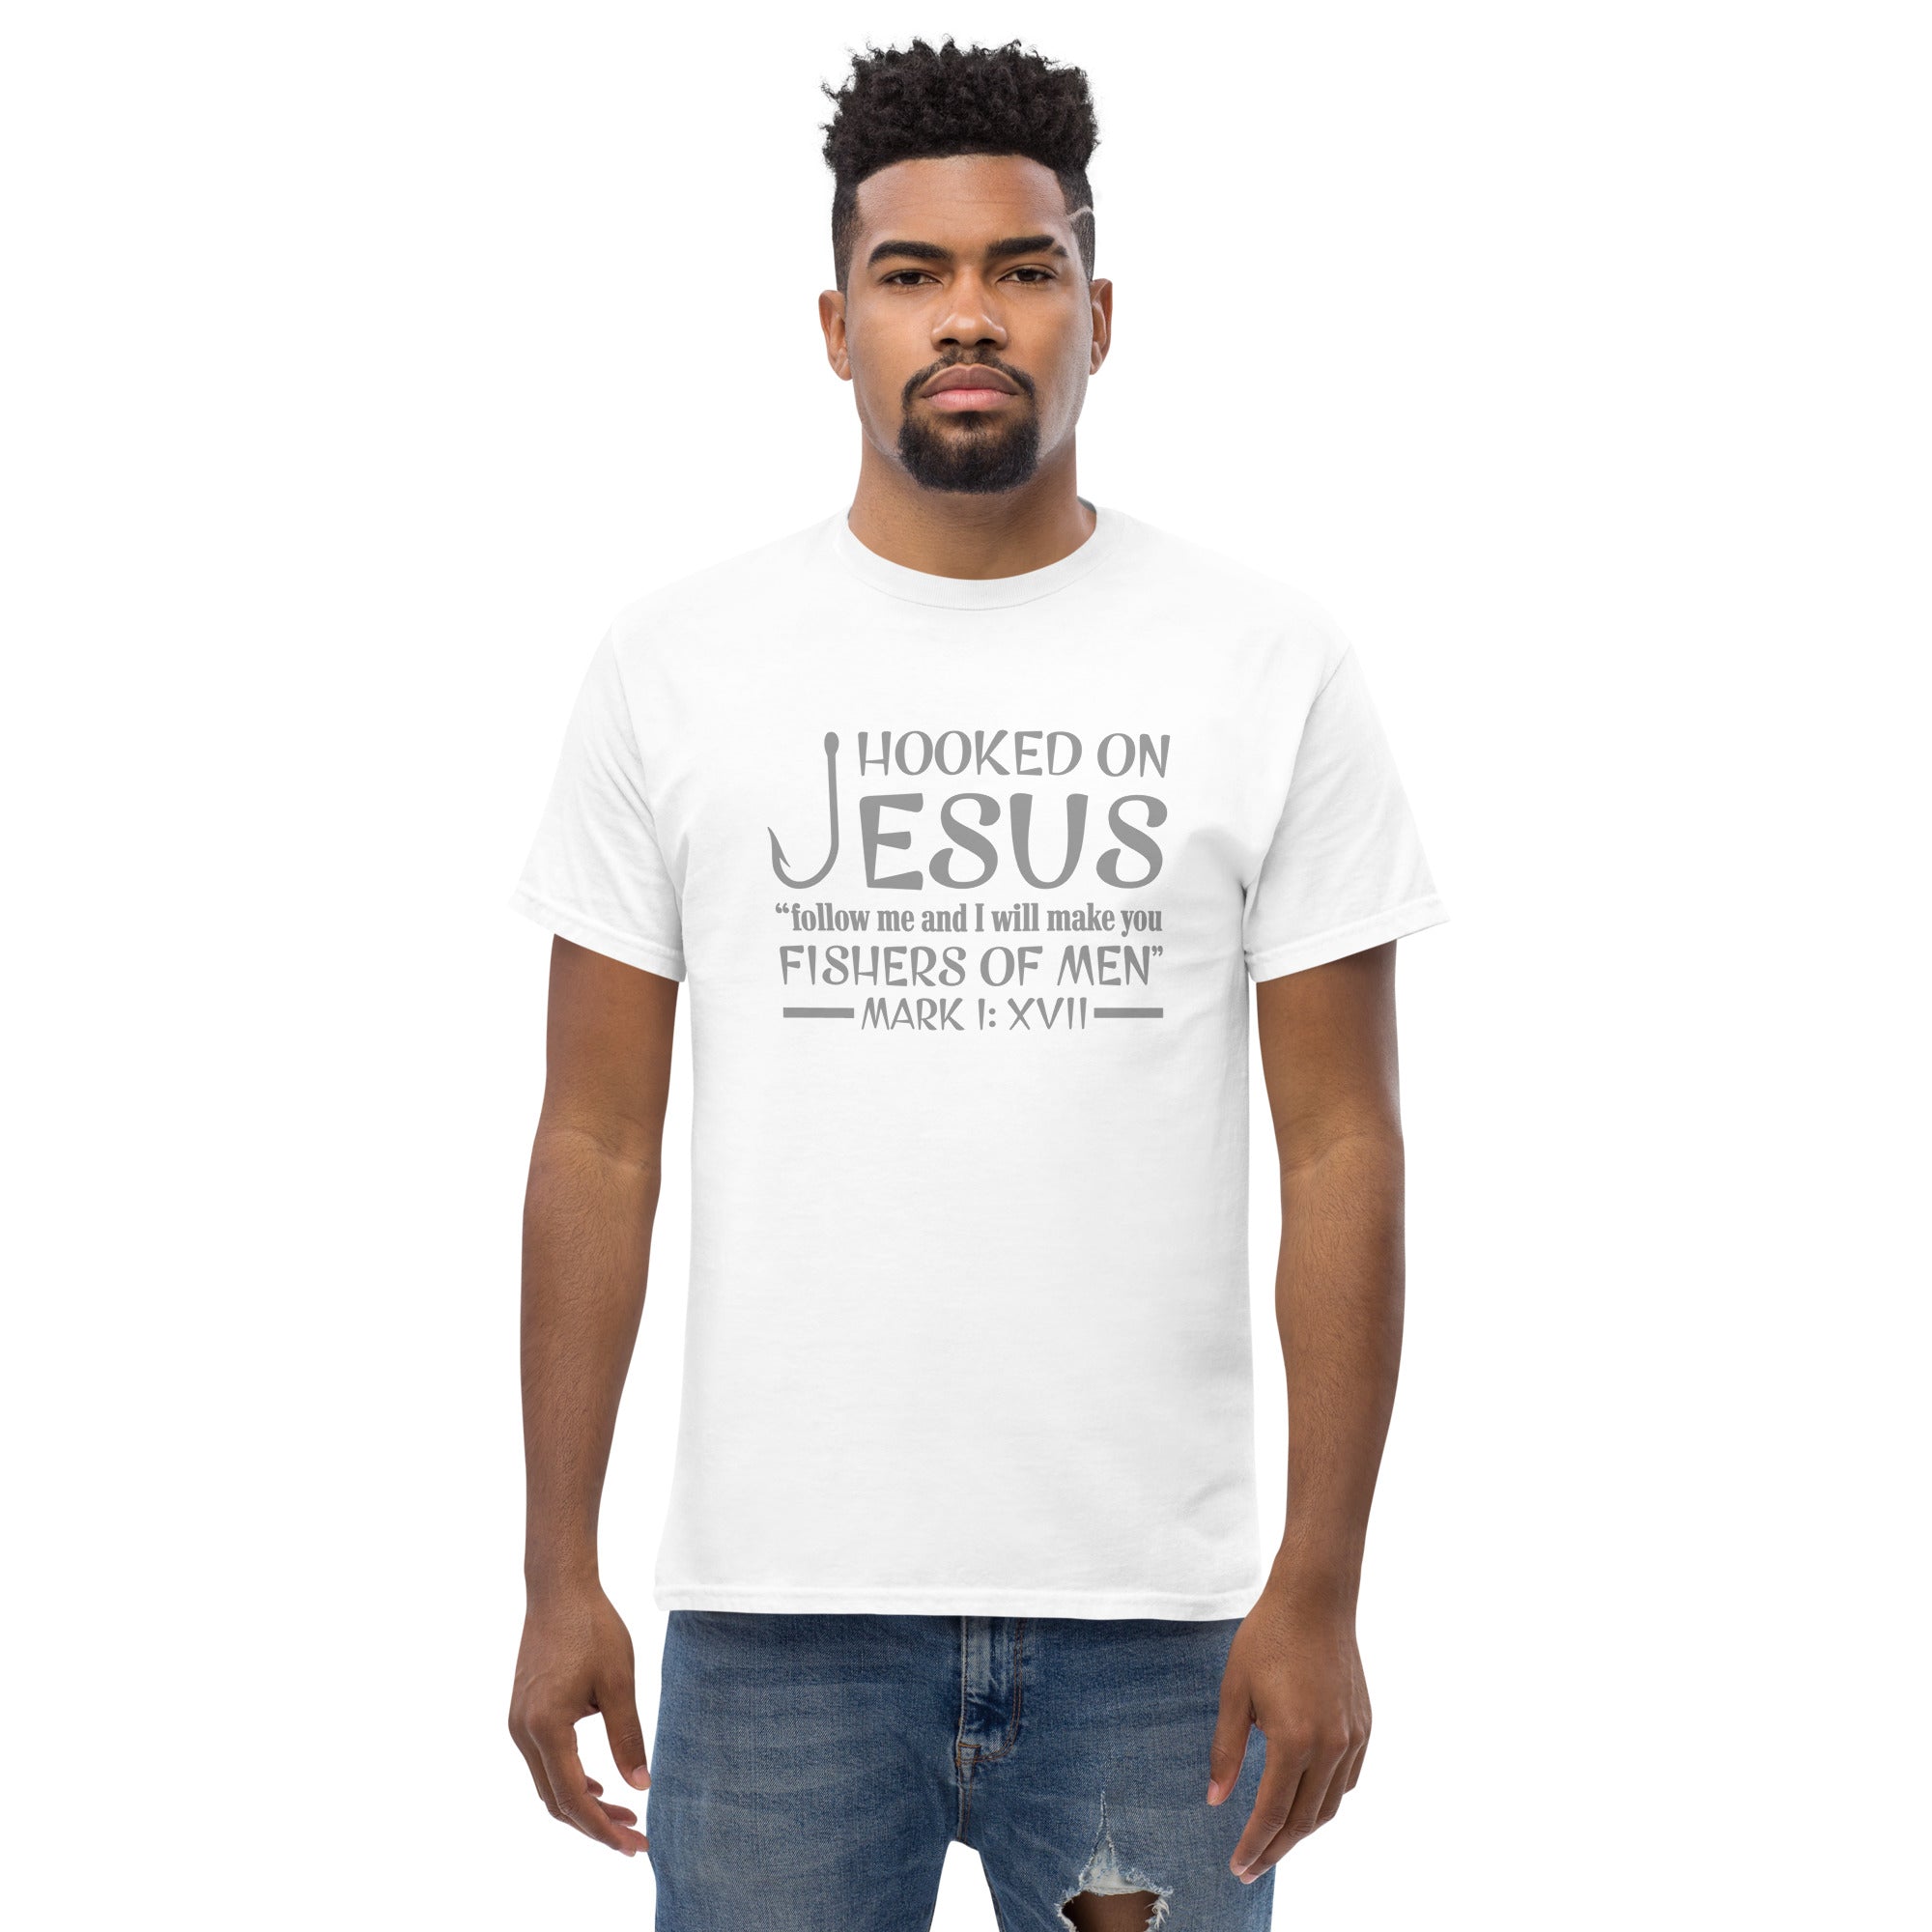 Hooked on Jesus "follow me and I will make you fishers of men" Tee